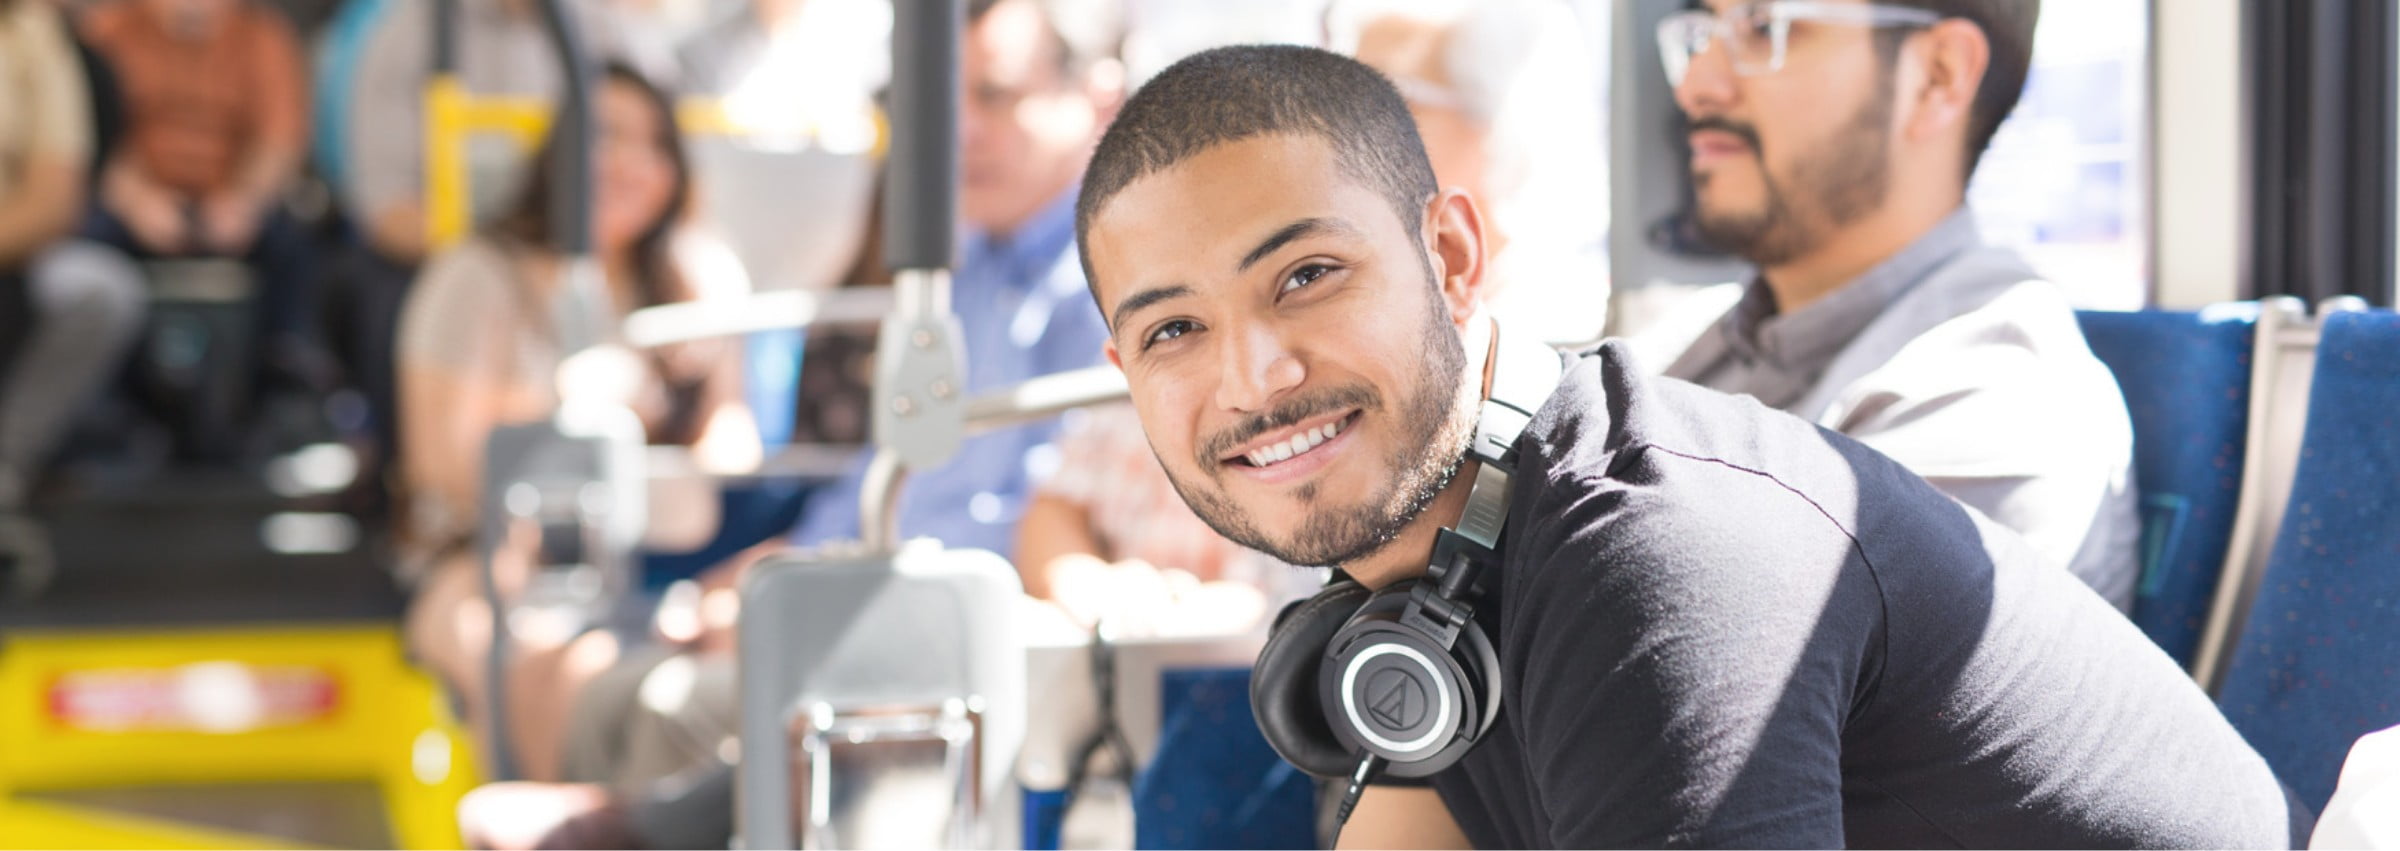 A young male rider smiles on the bus while wearing headphones around his neck